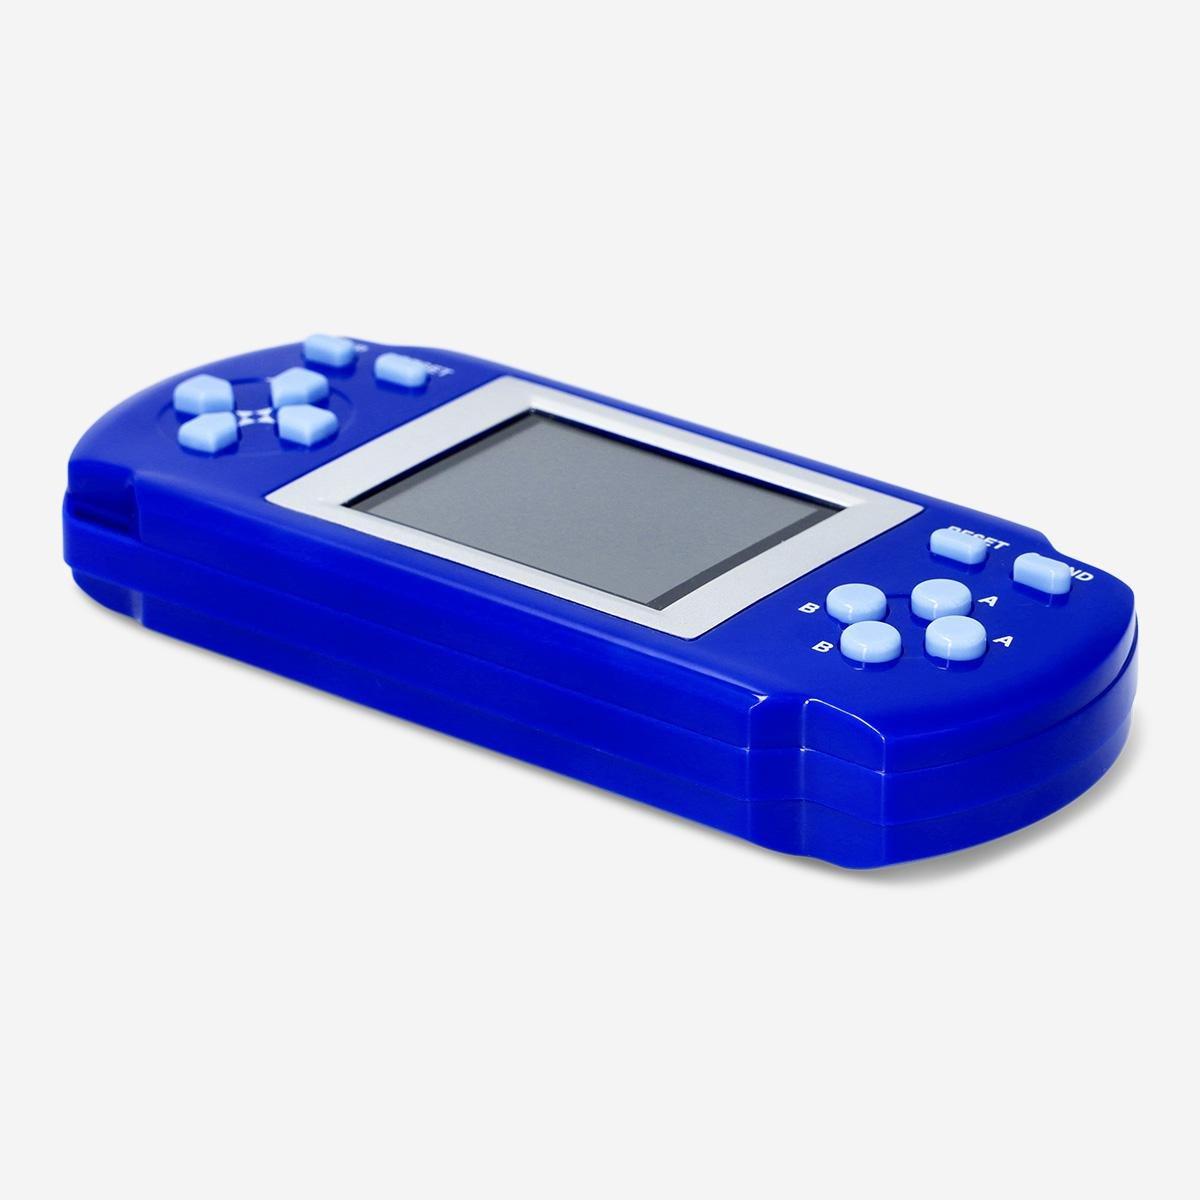 Blue game console